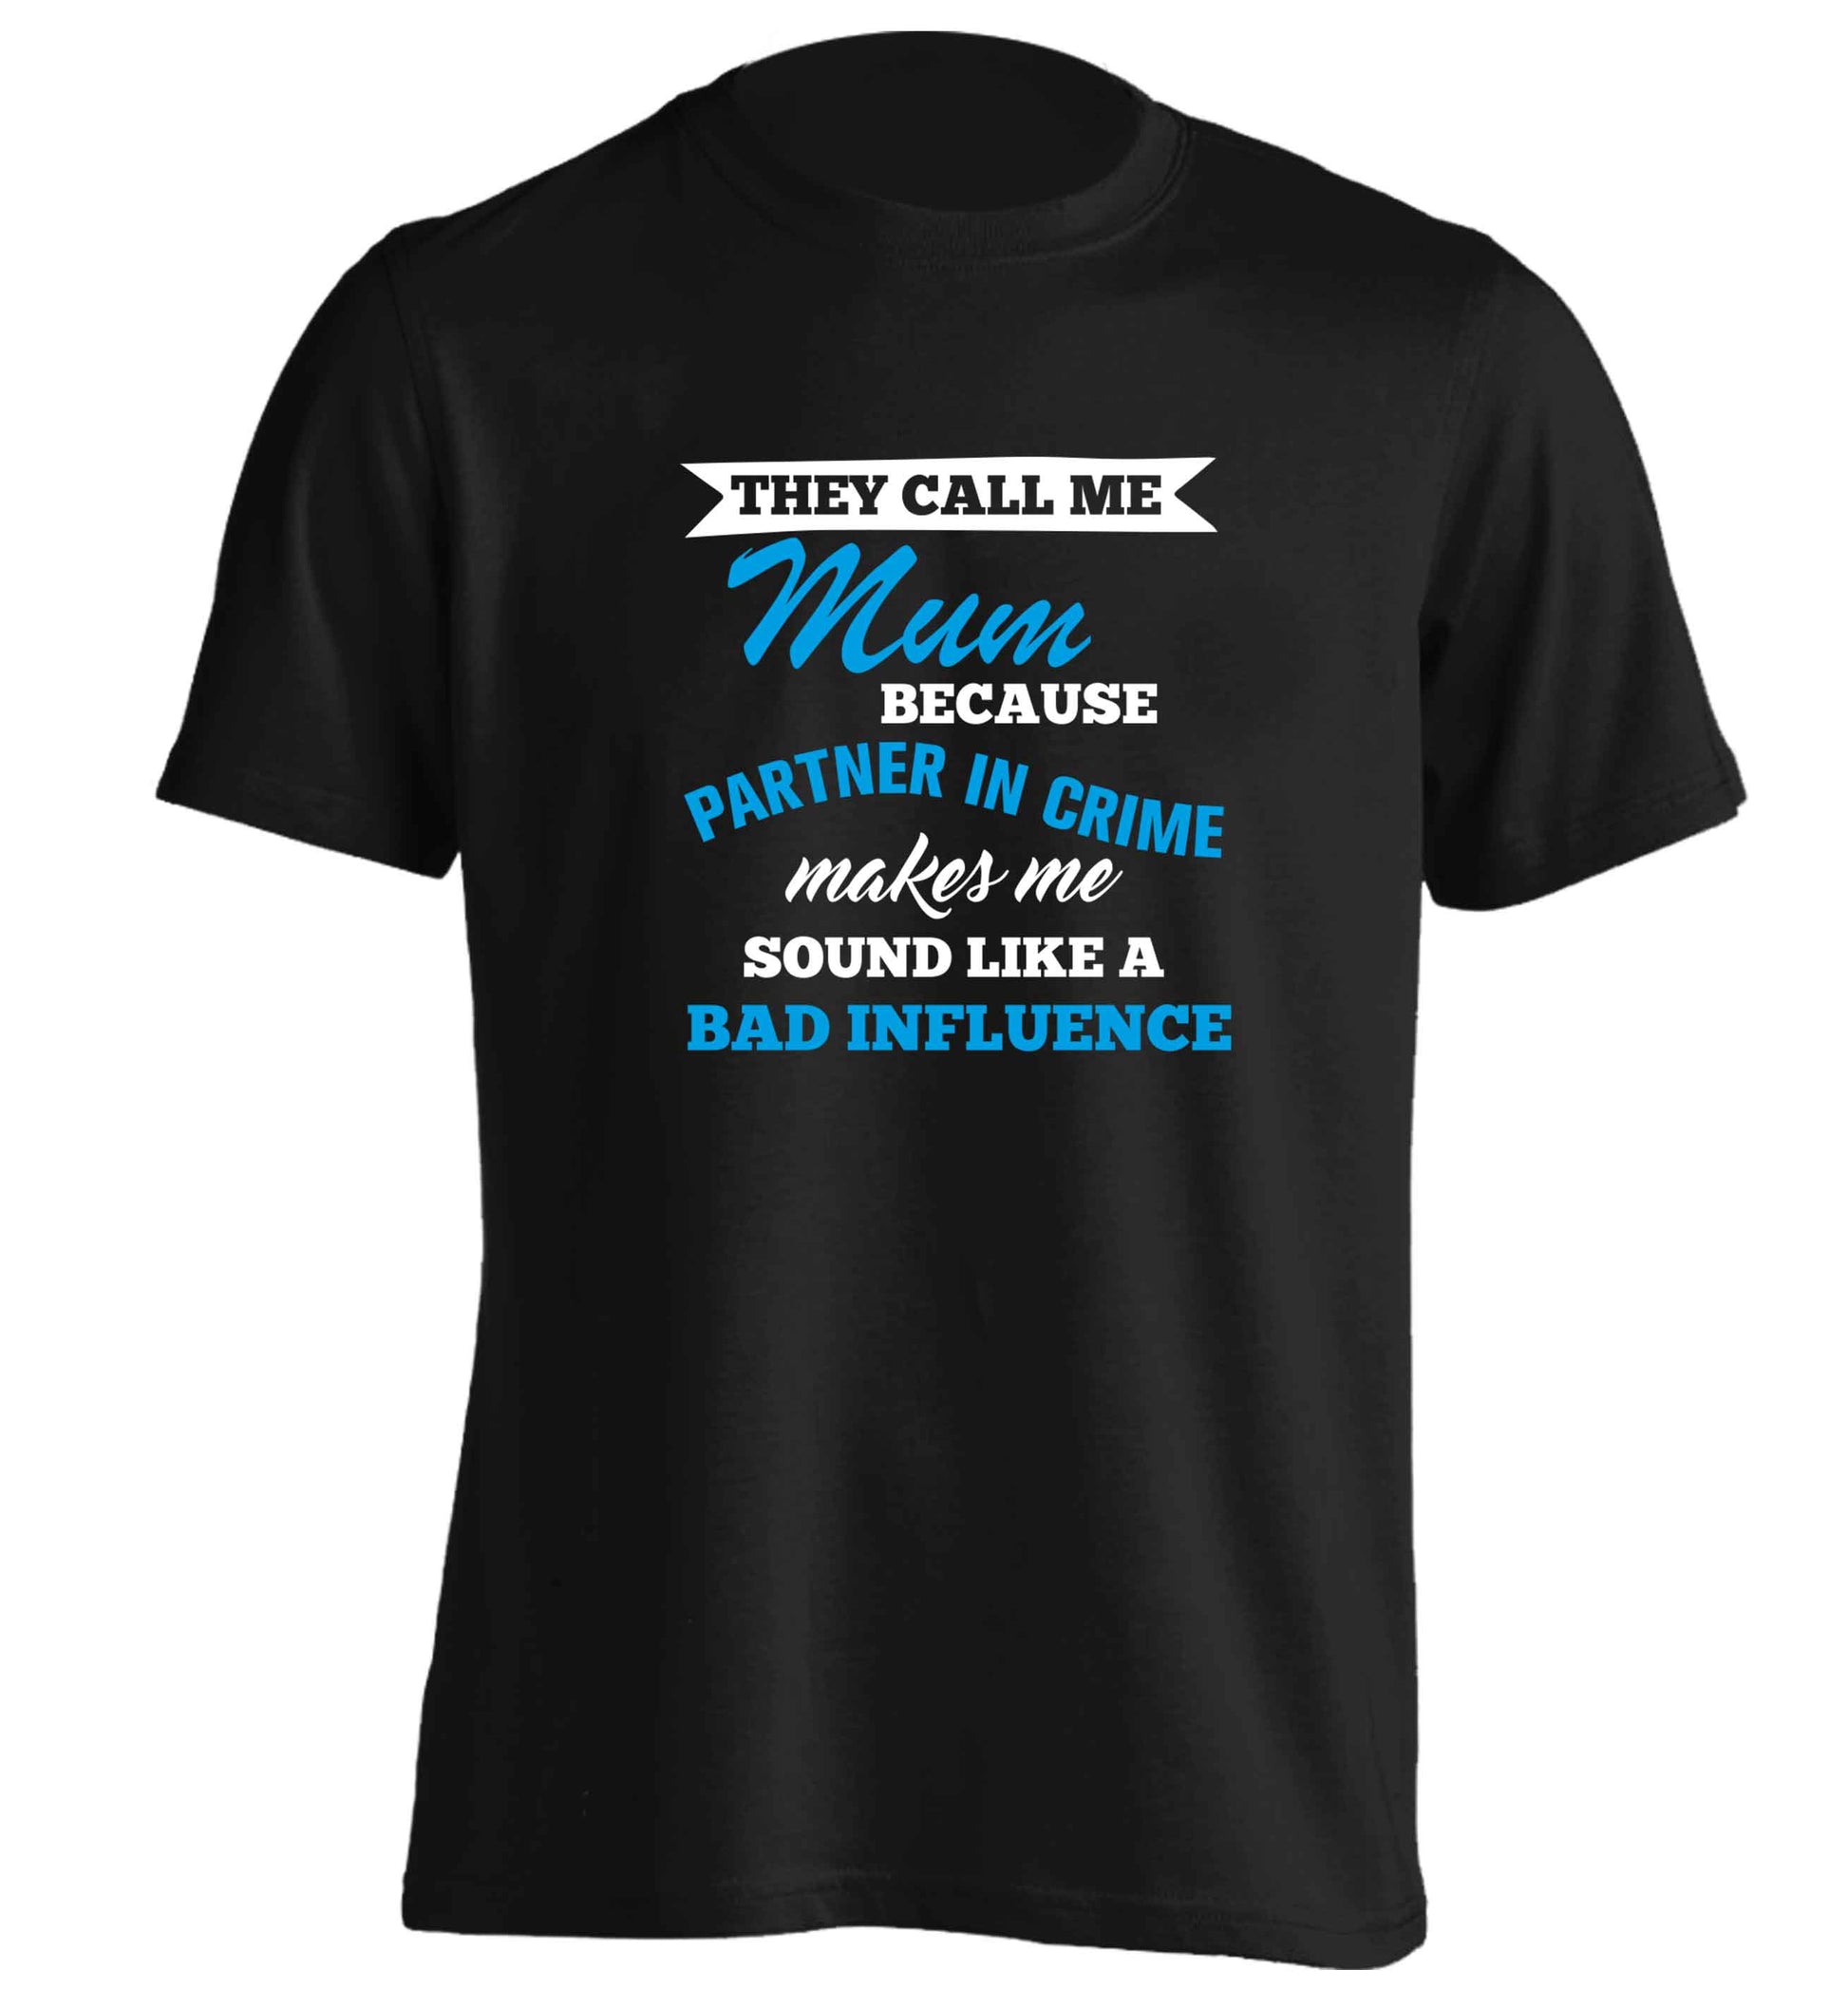 They call me mum because partner in crime makes me sound like a bad influence adults unisex black Tshirt 2XL